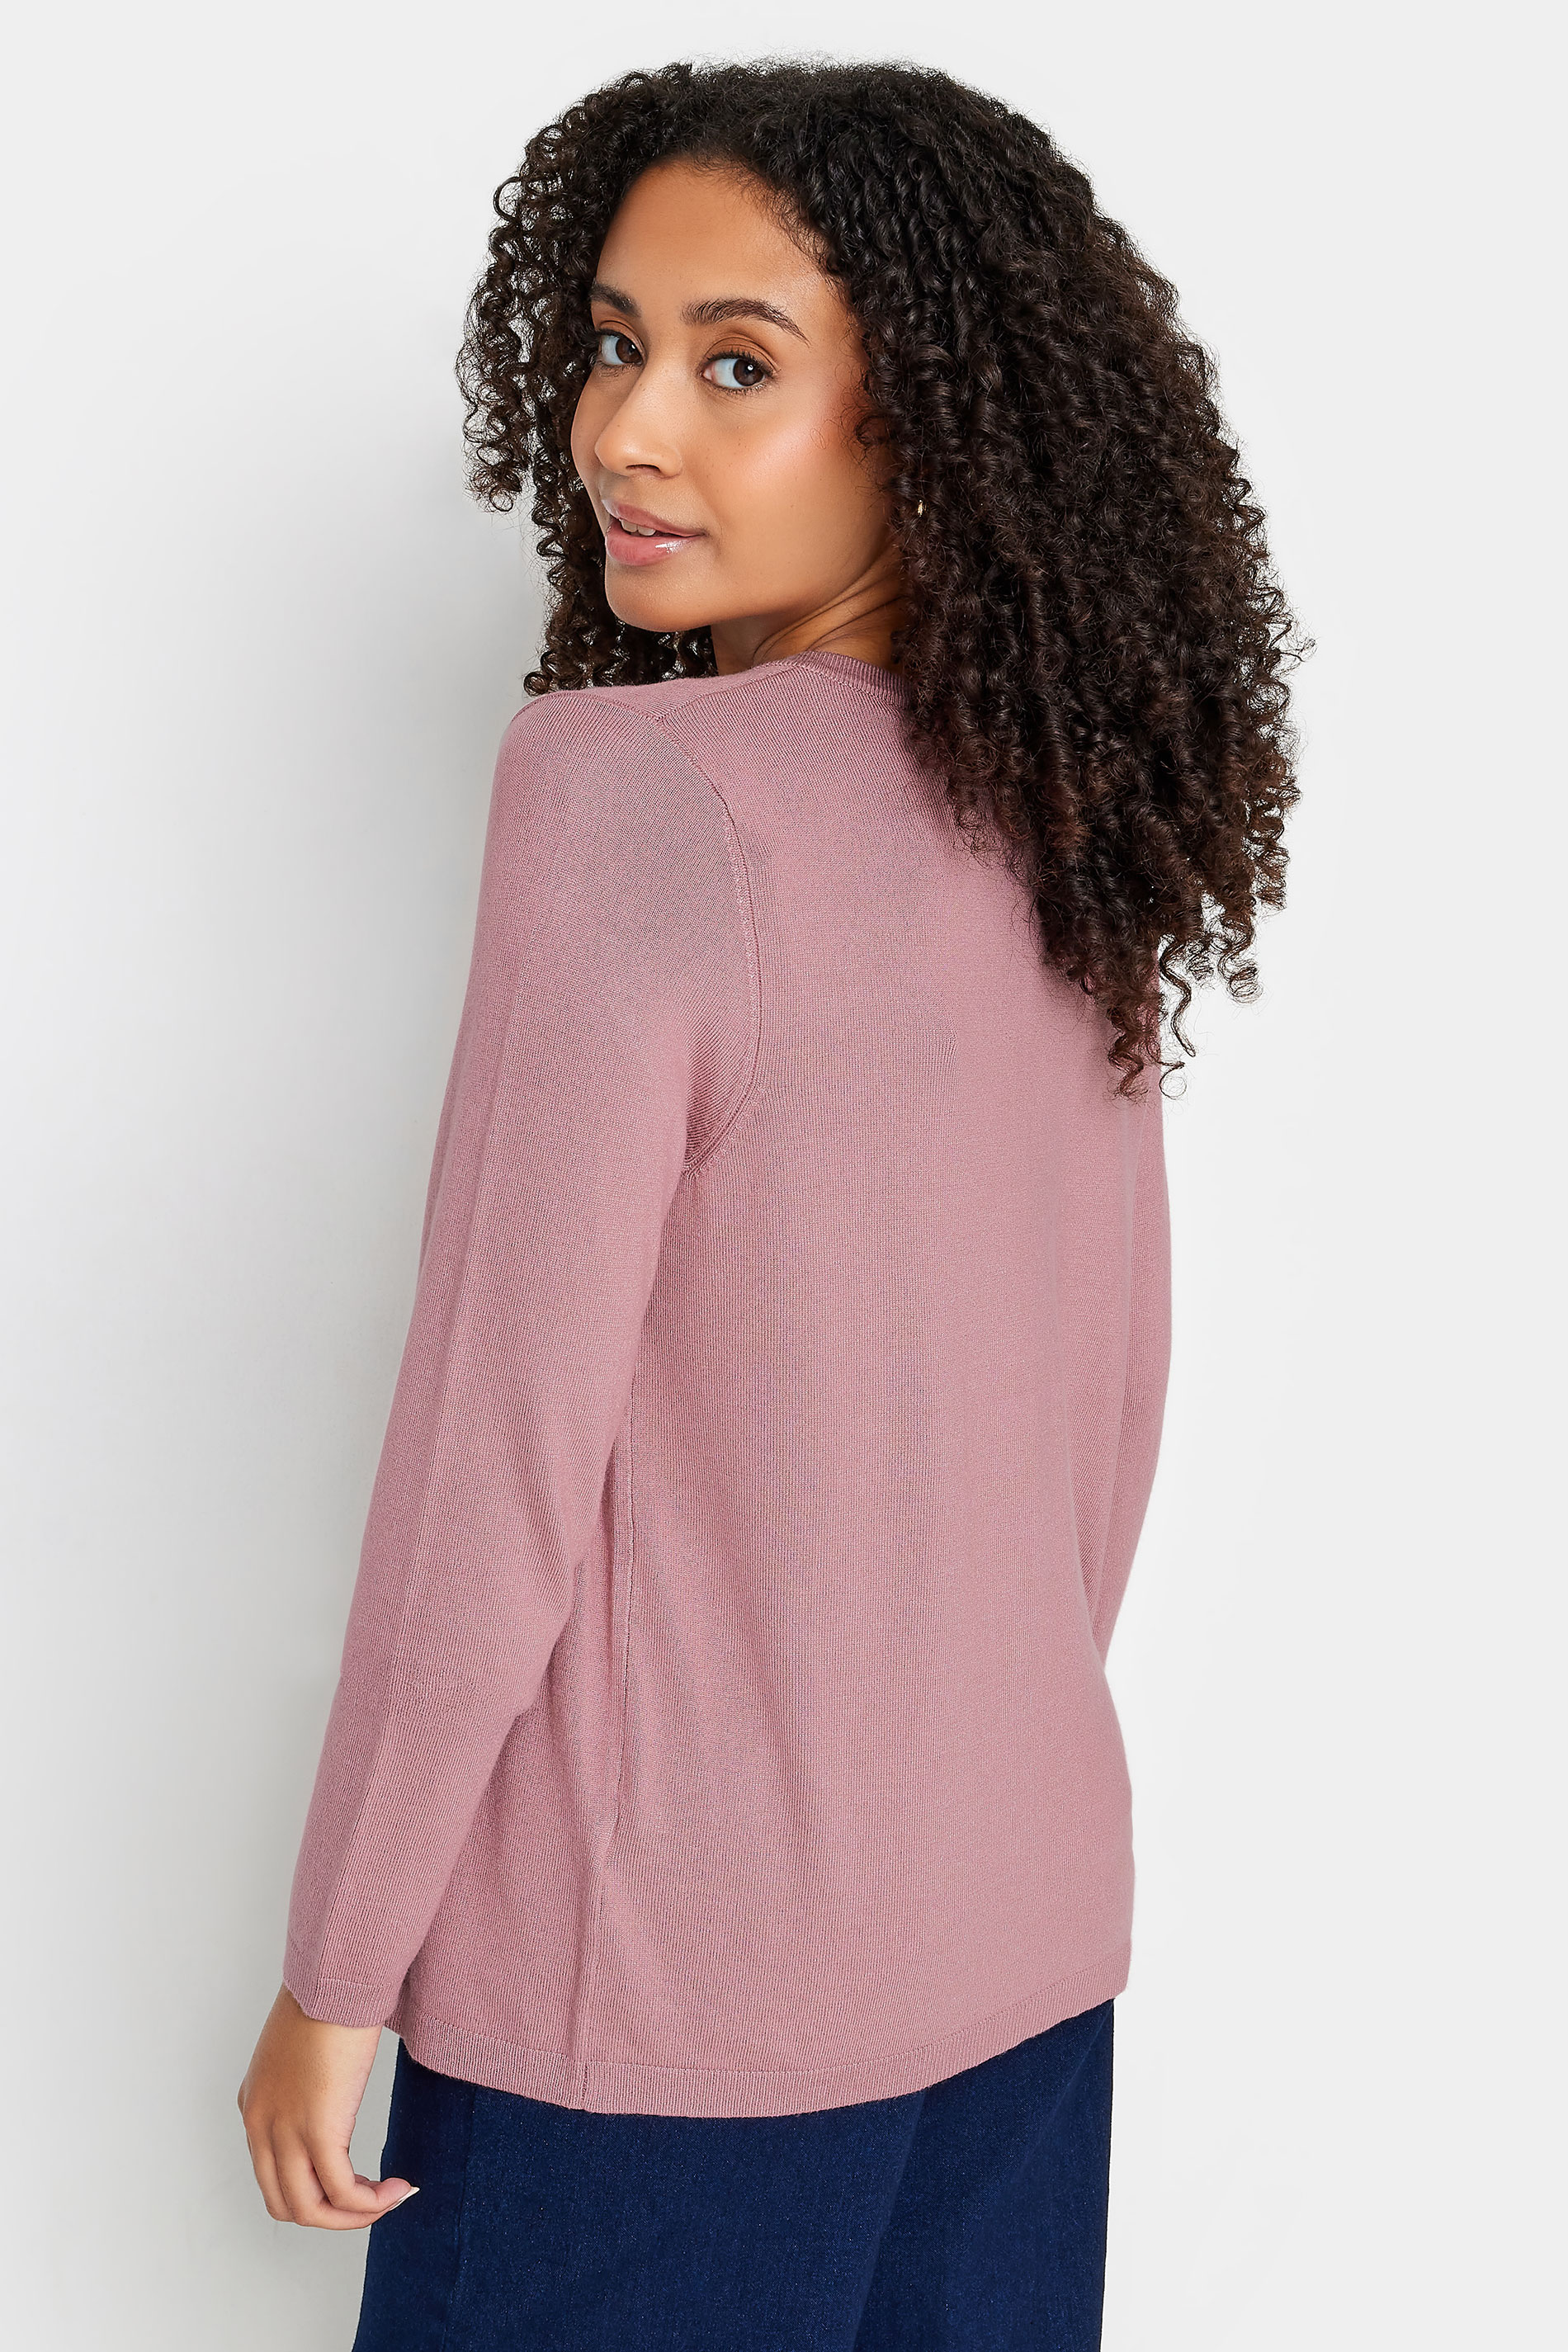 M&Co Petite Pink Button Up Cardigan | M&Co 3